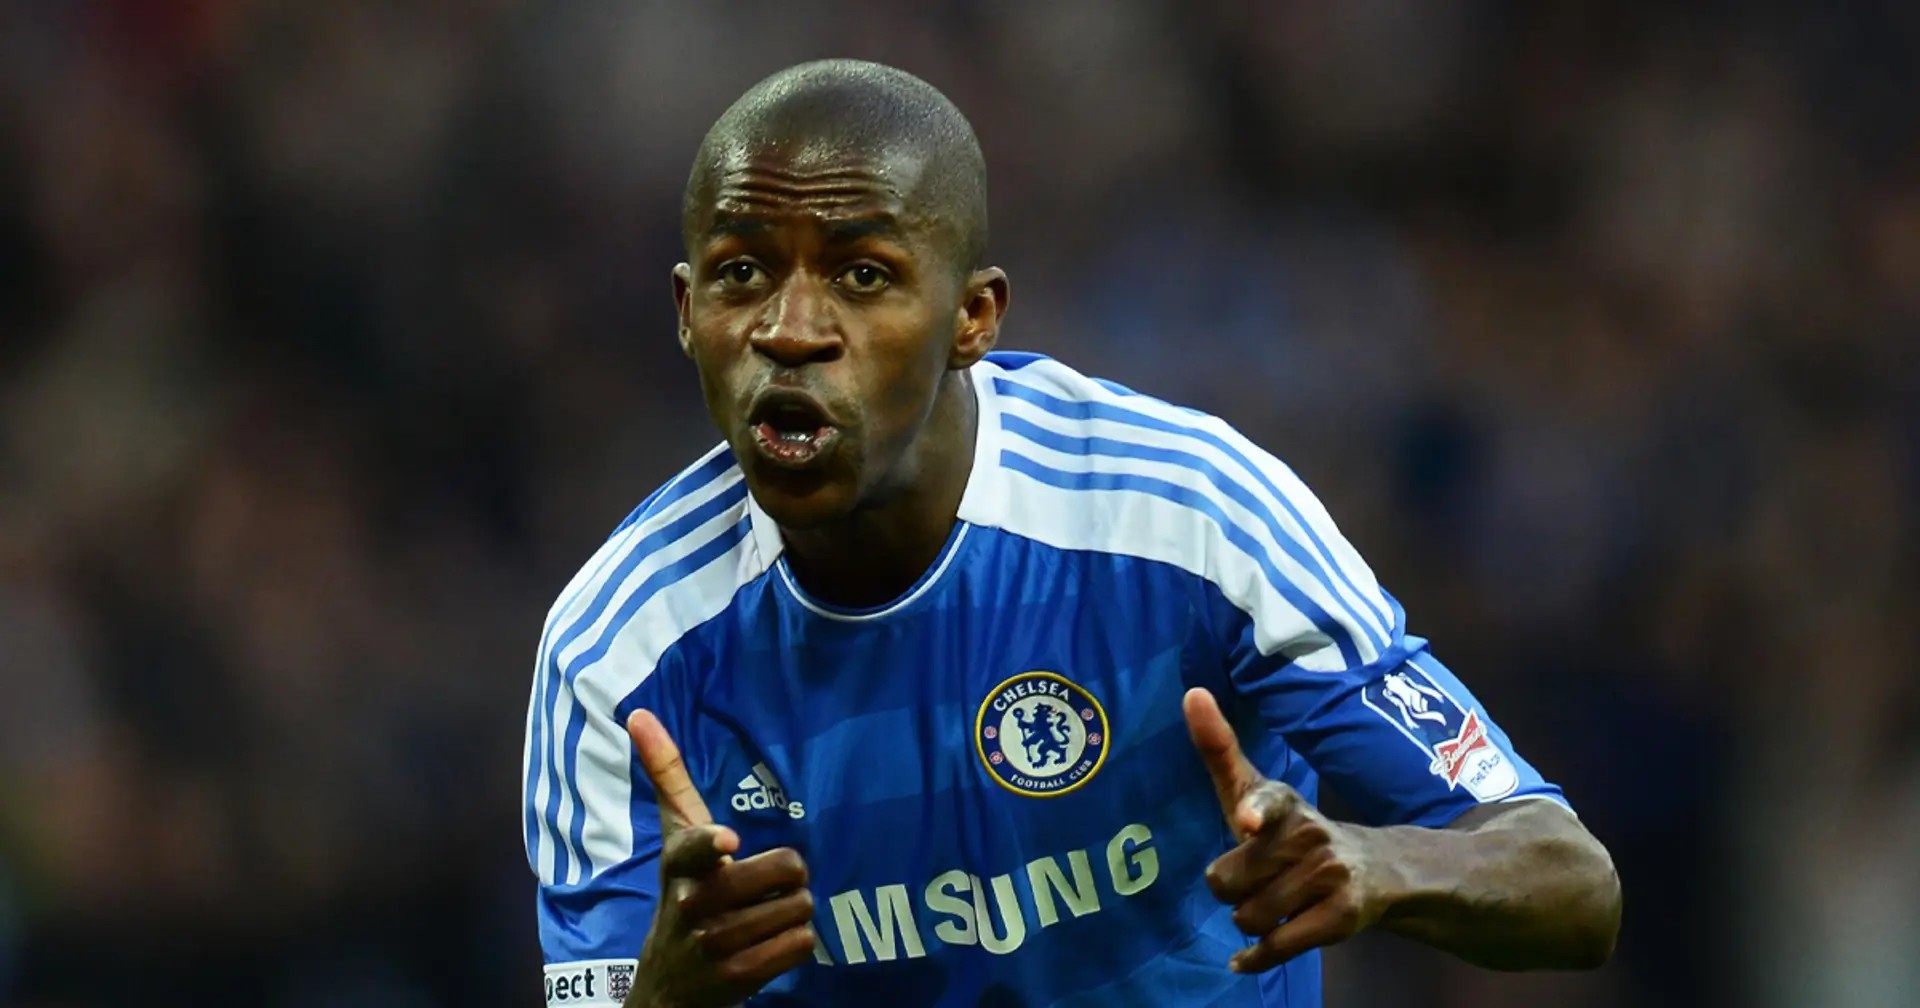 Ramires reportedly considers retirement at just 33 years old after terminating Palmeiras contract